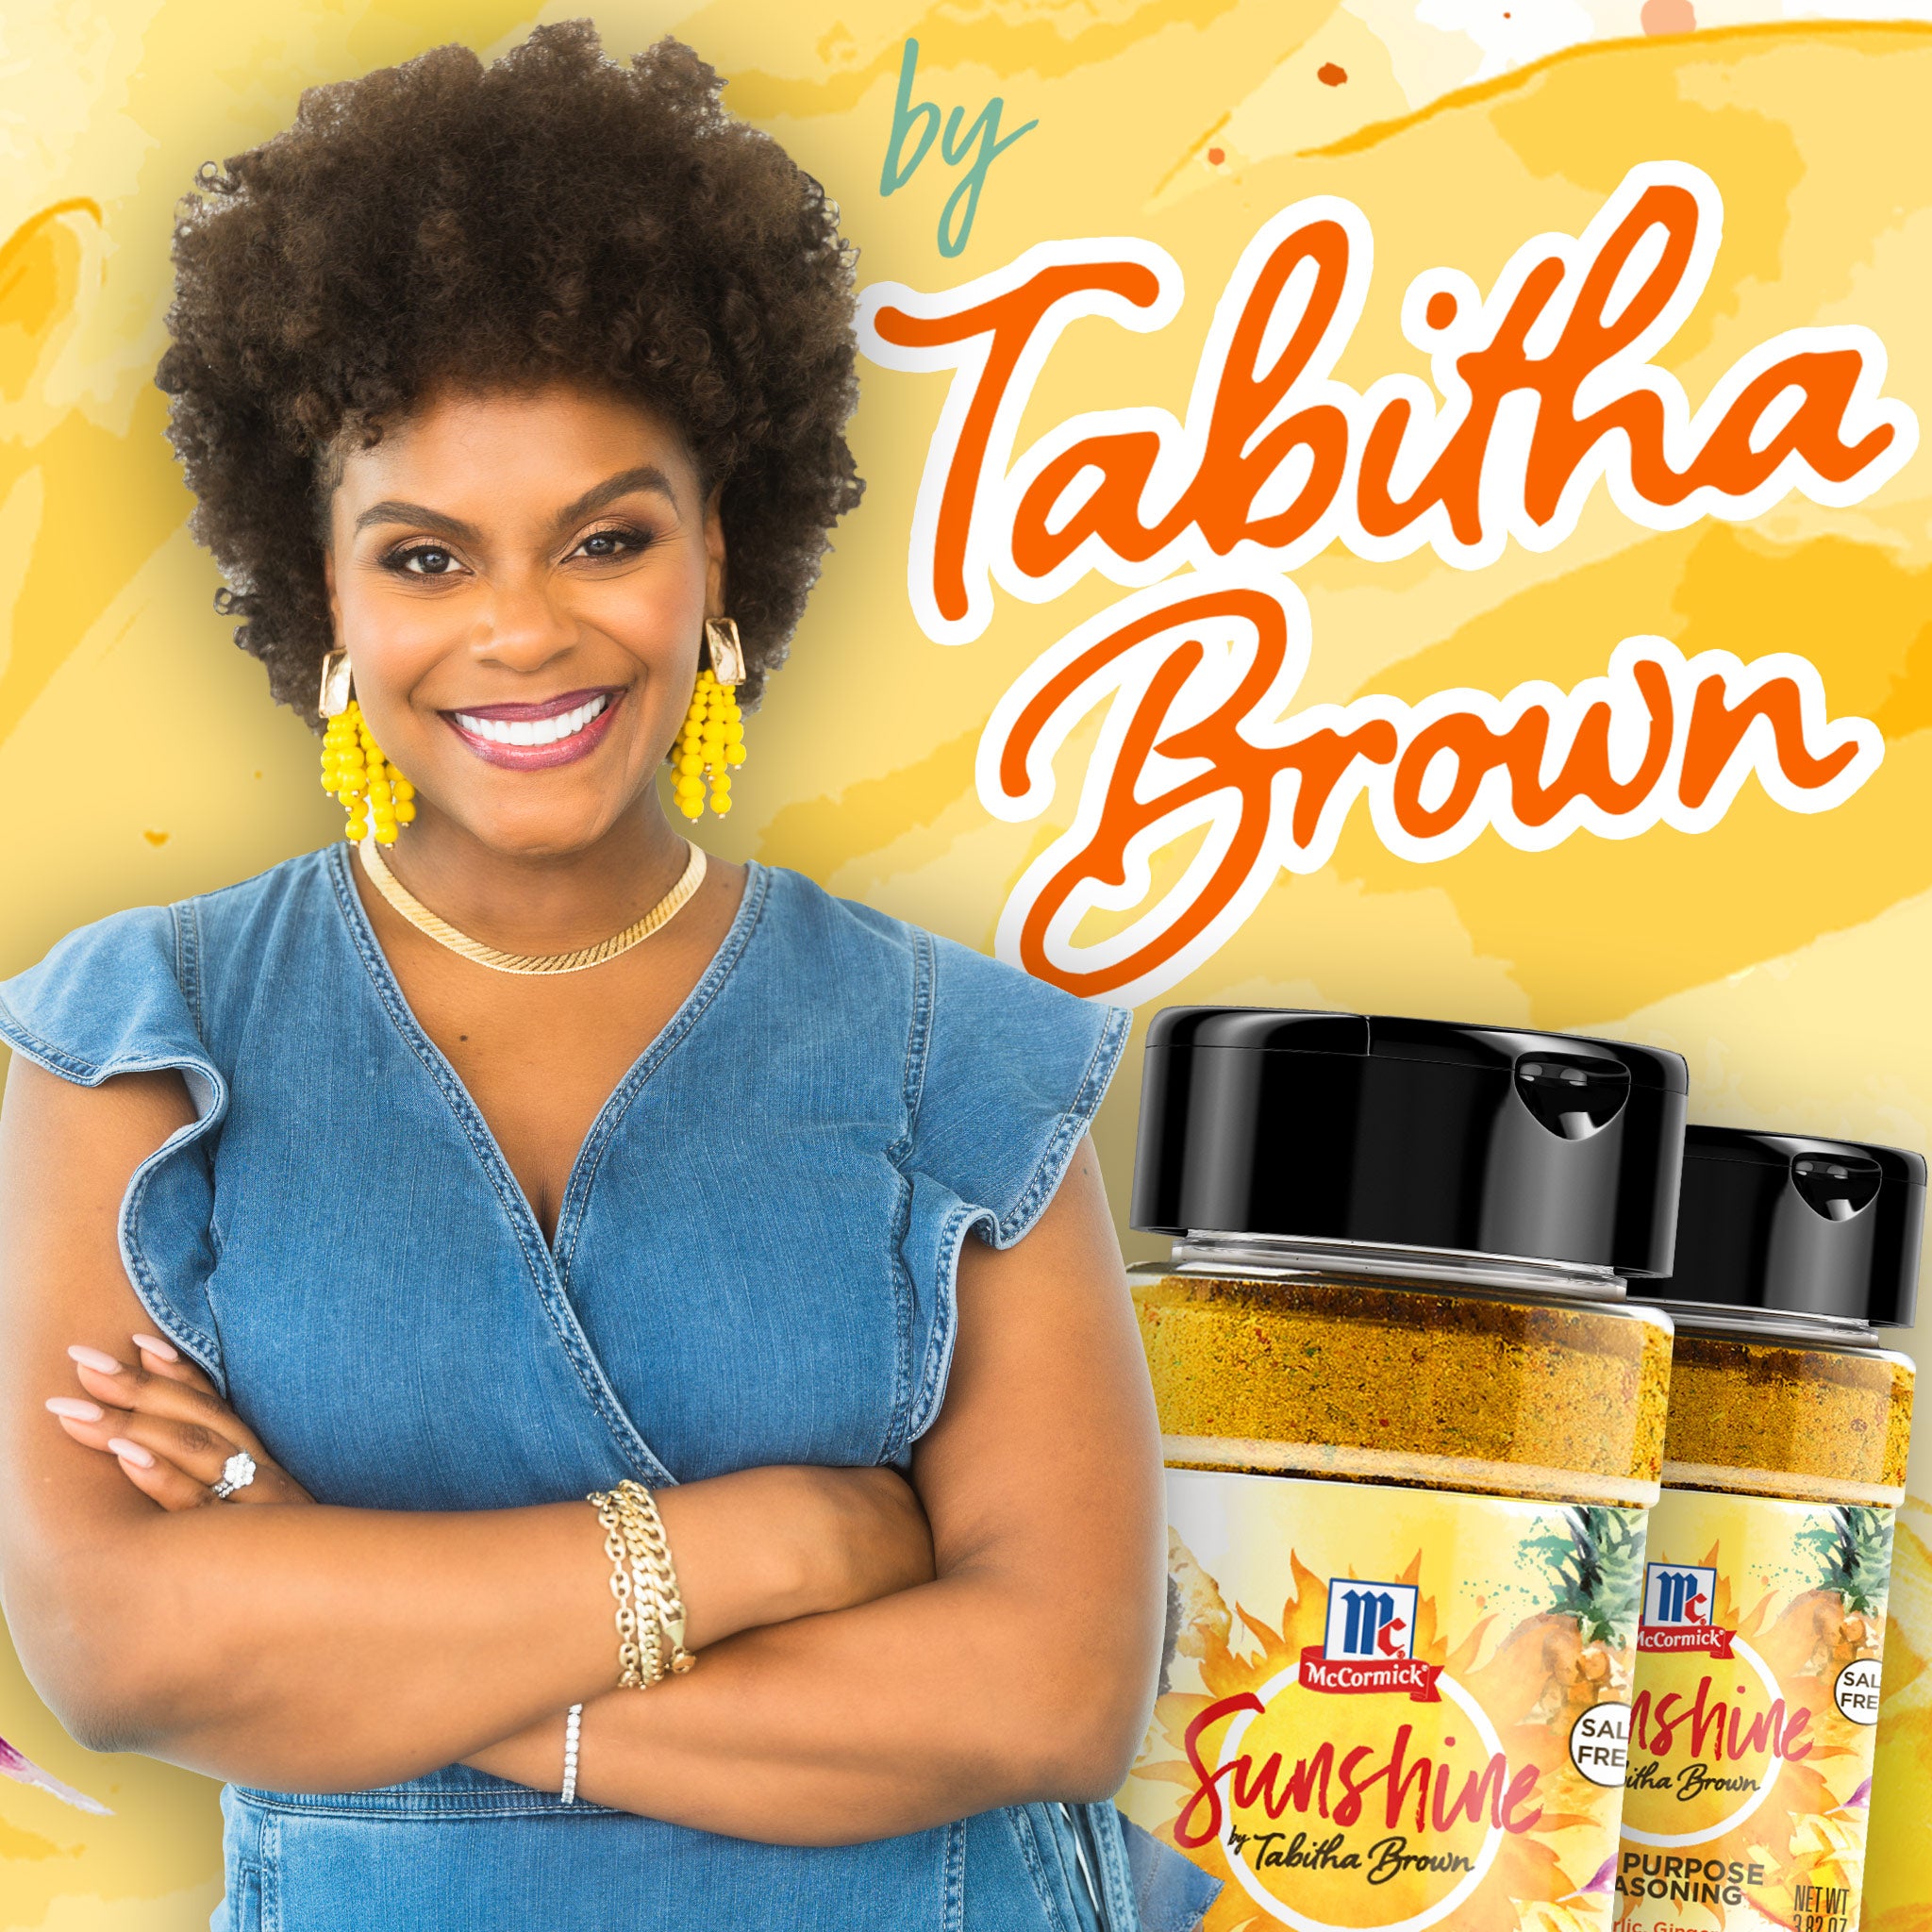 Tabitha Brown's Seasoning Is Coming Next Month - Vkind